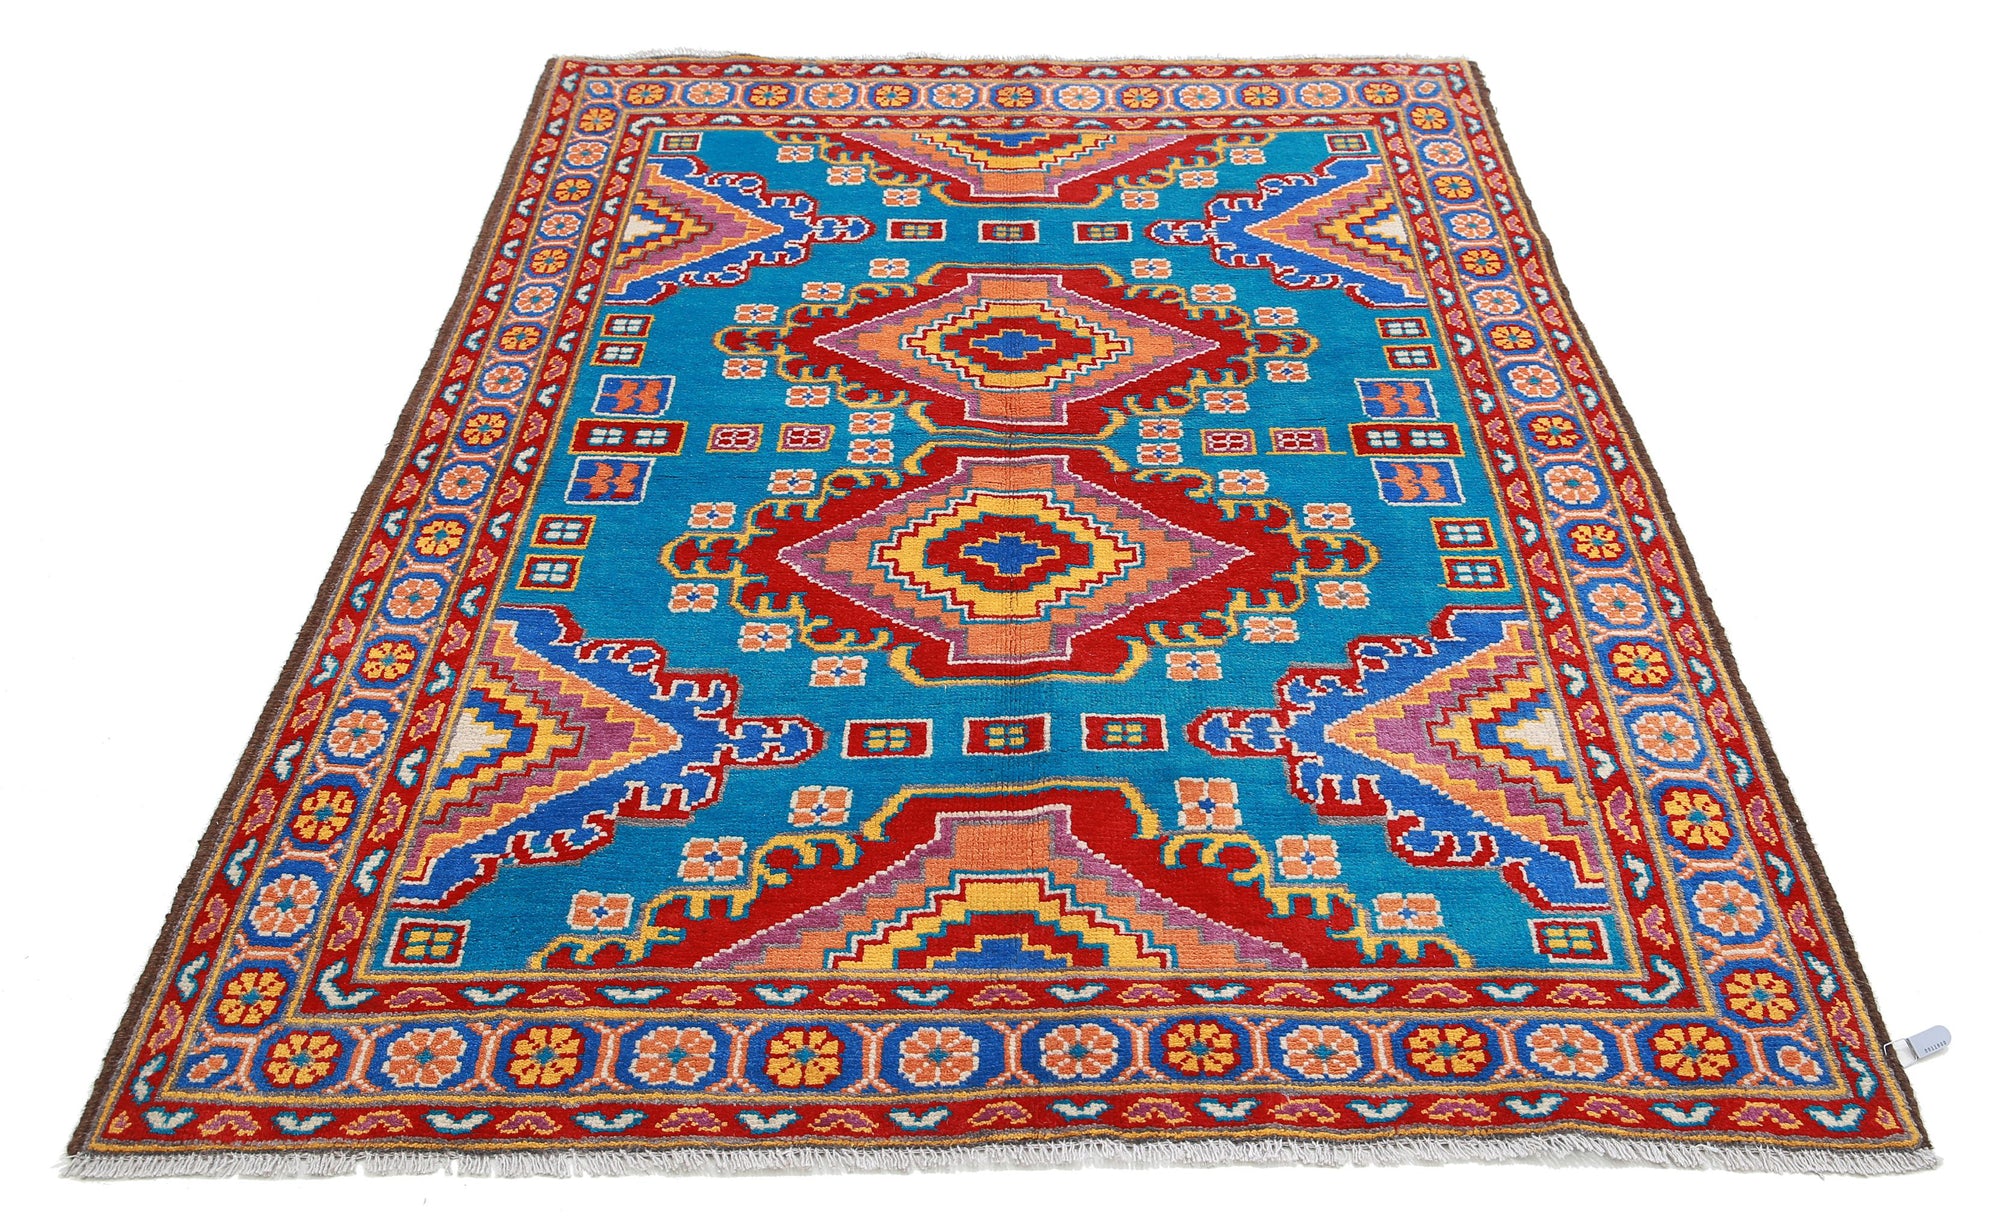 Revival-hand-knotted-qarghani-wool-rug-5014100-3.jpg